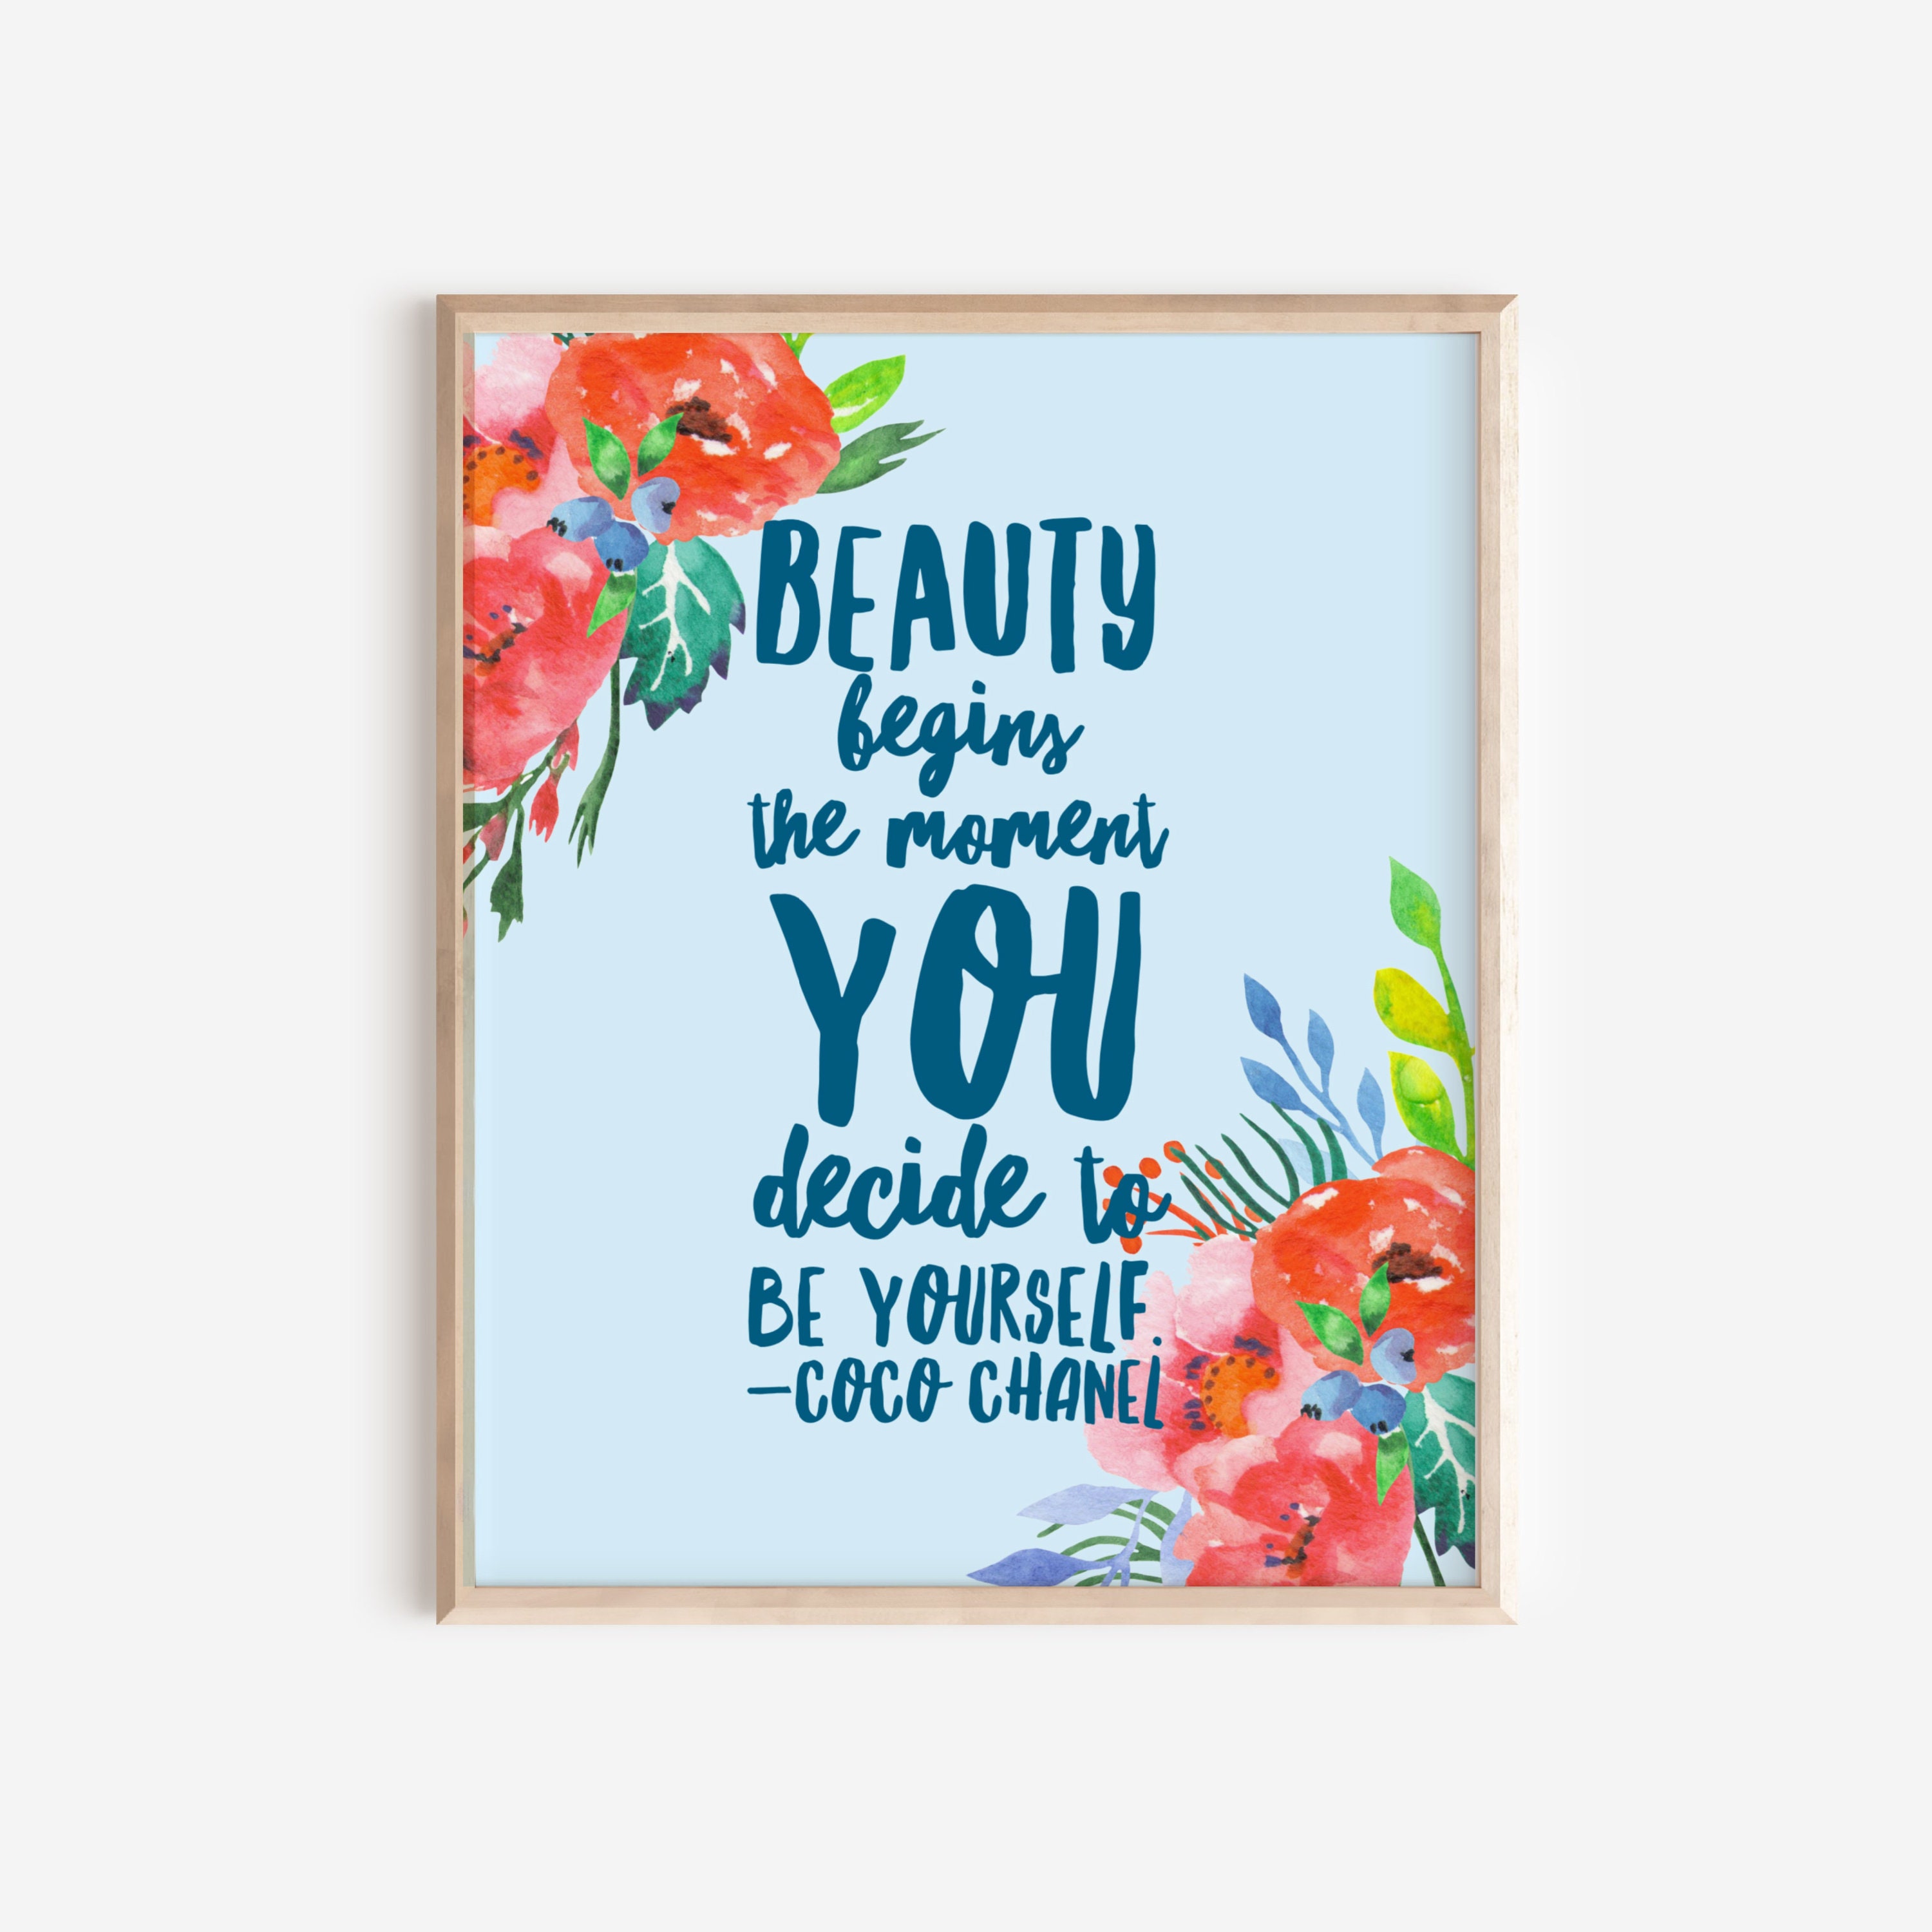 Beauty begins the moment you decide to be yourself. - Quote by